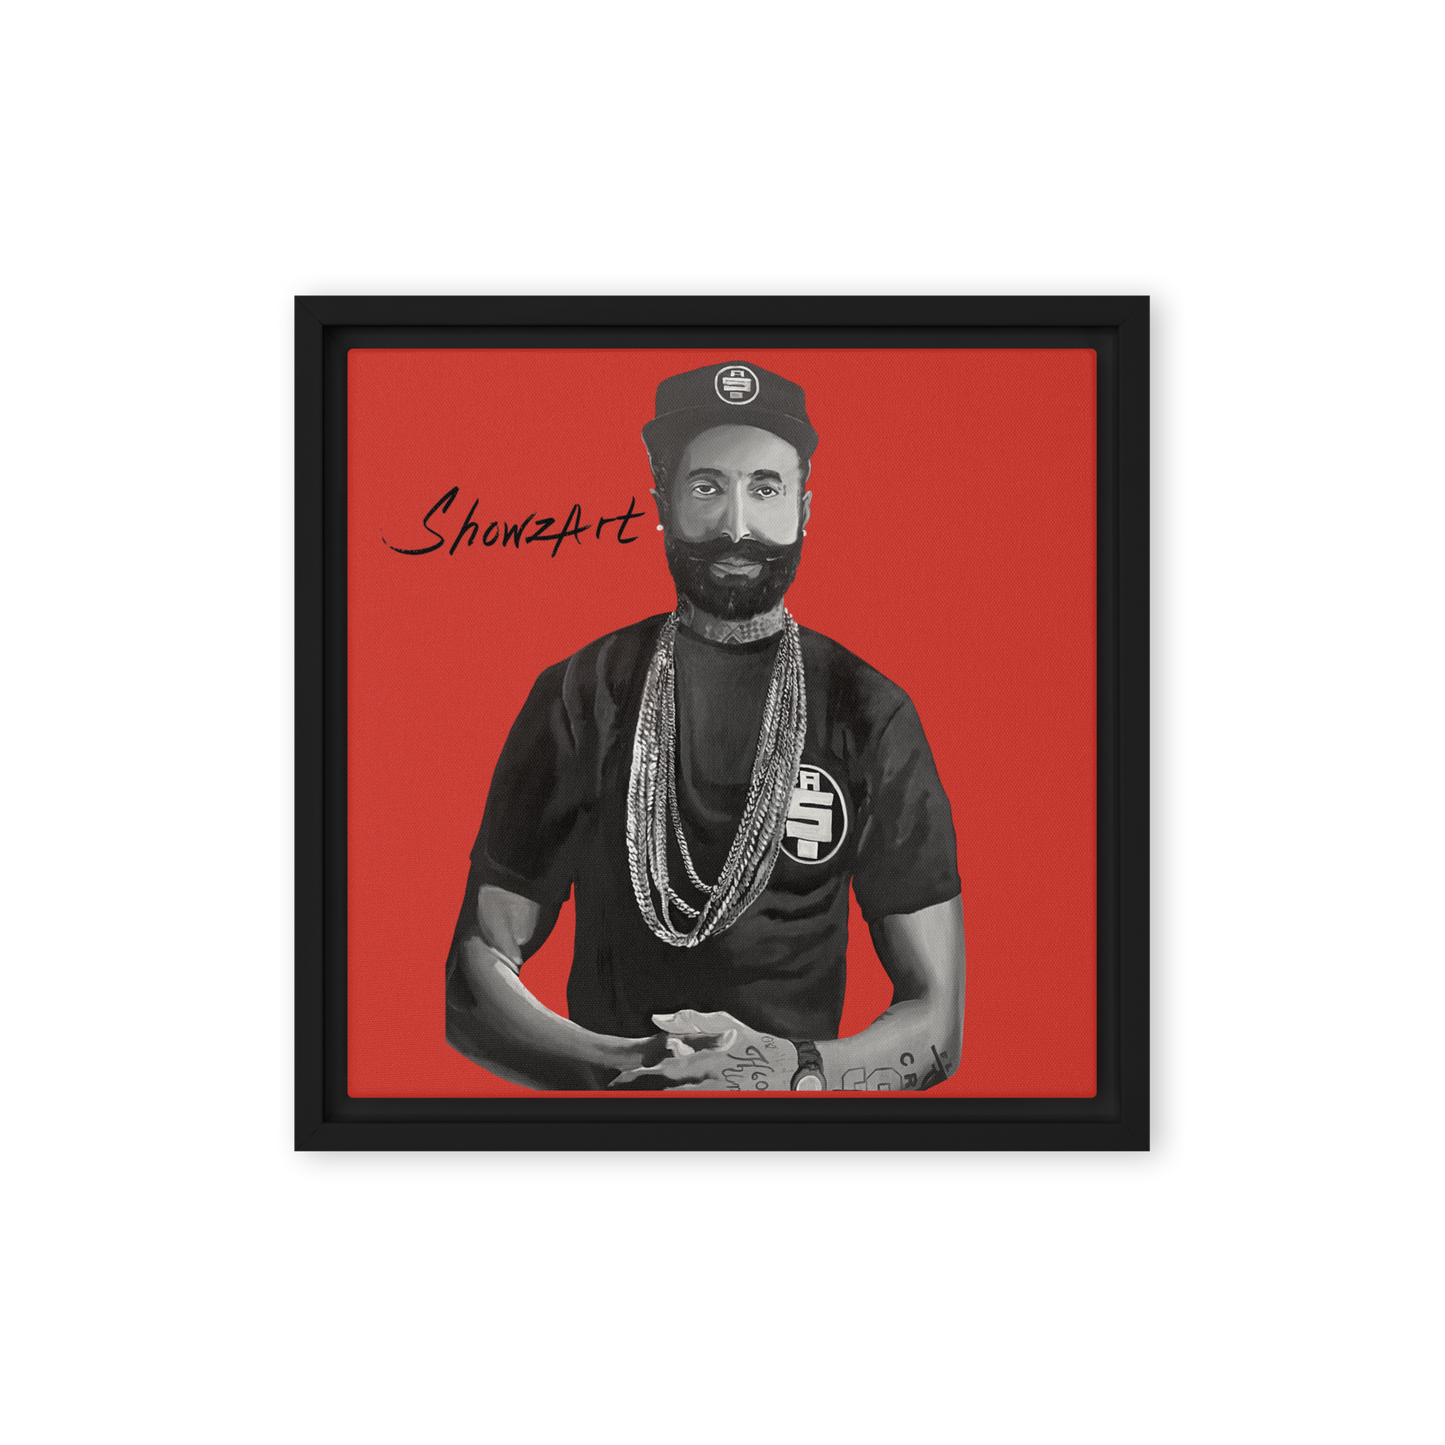 Red Collection: Haile Selassie + Nipsey Hussle